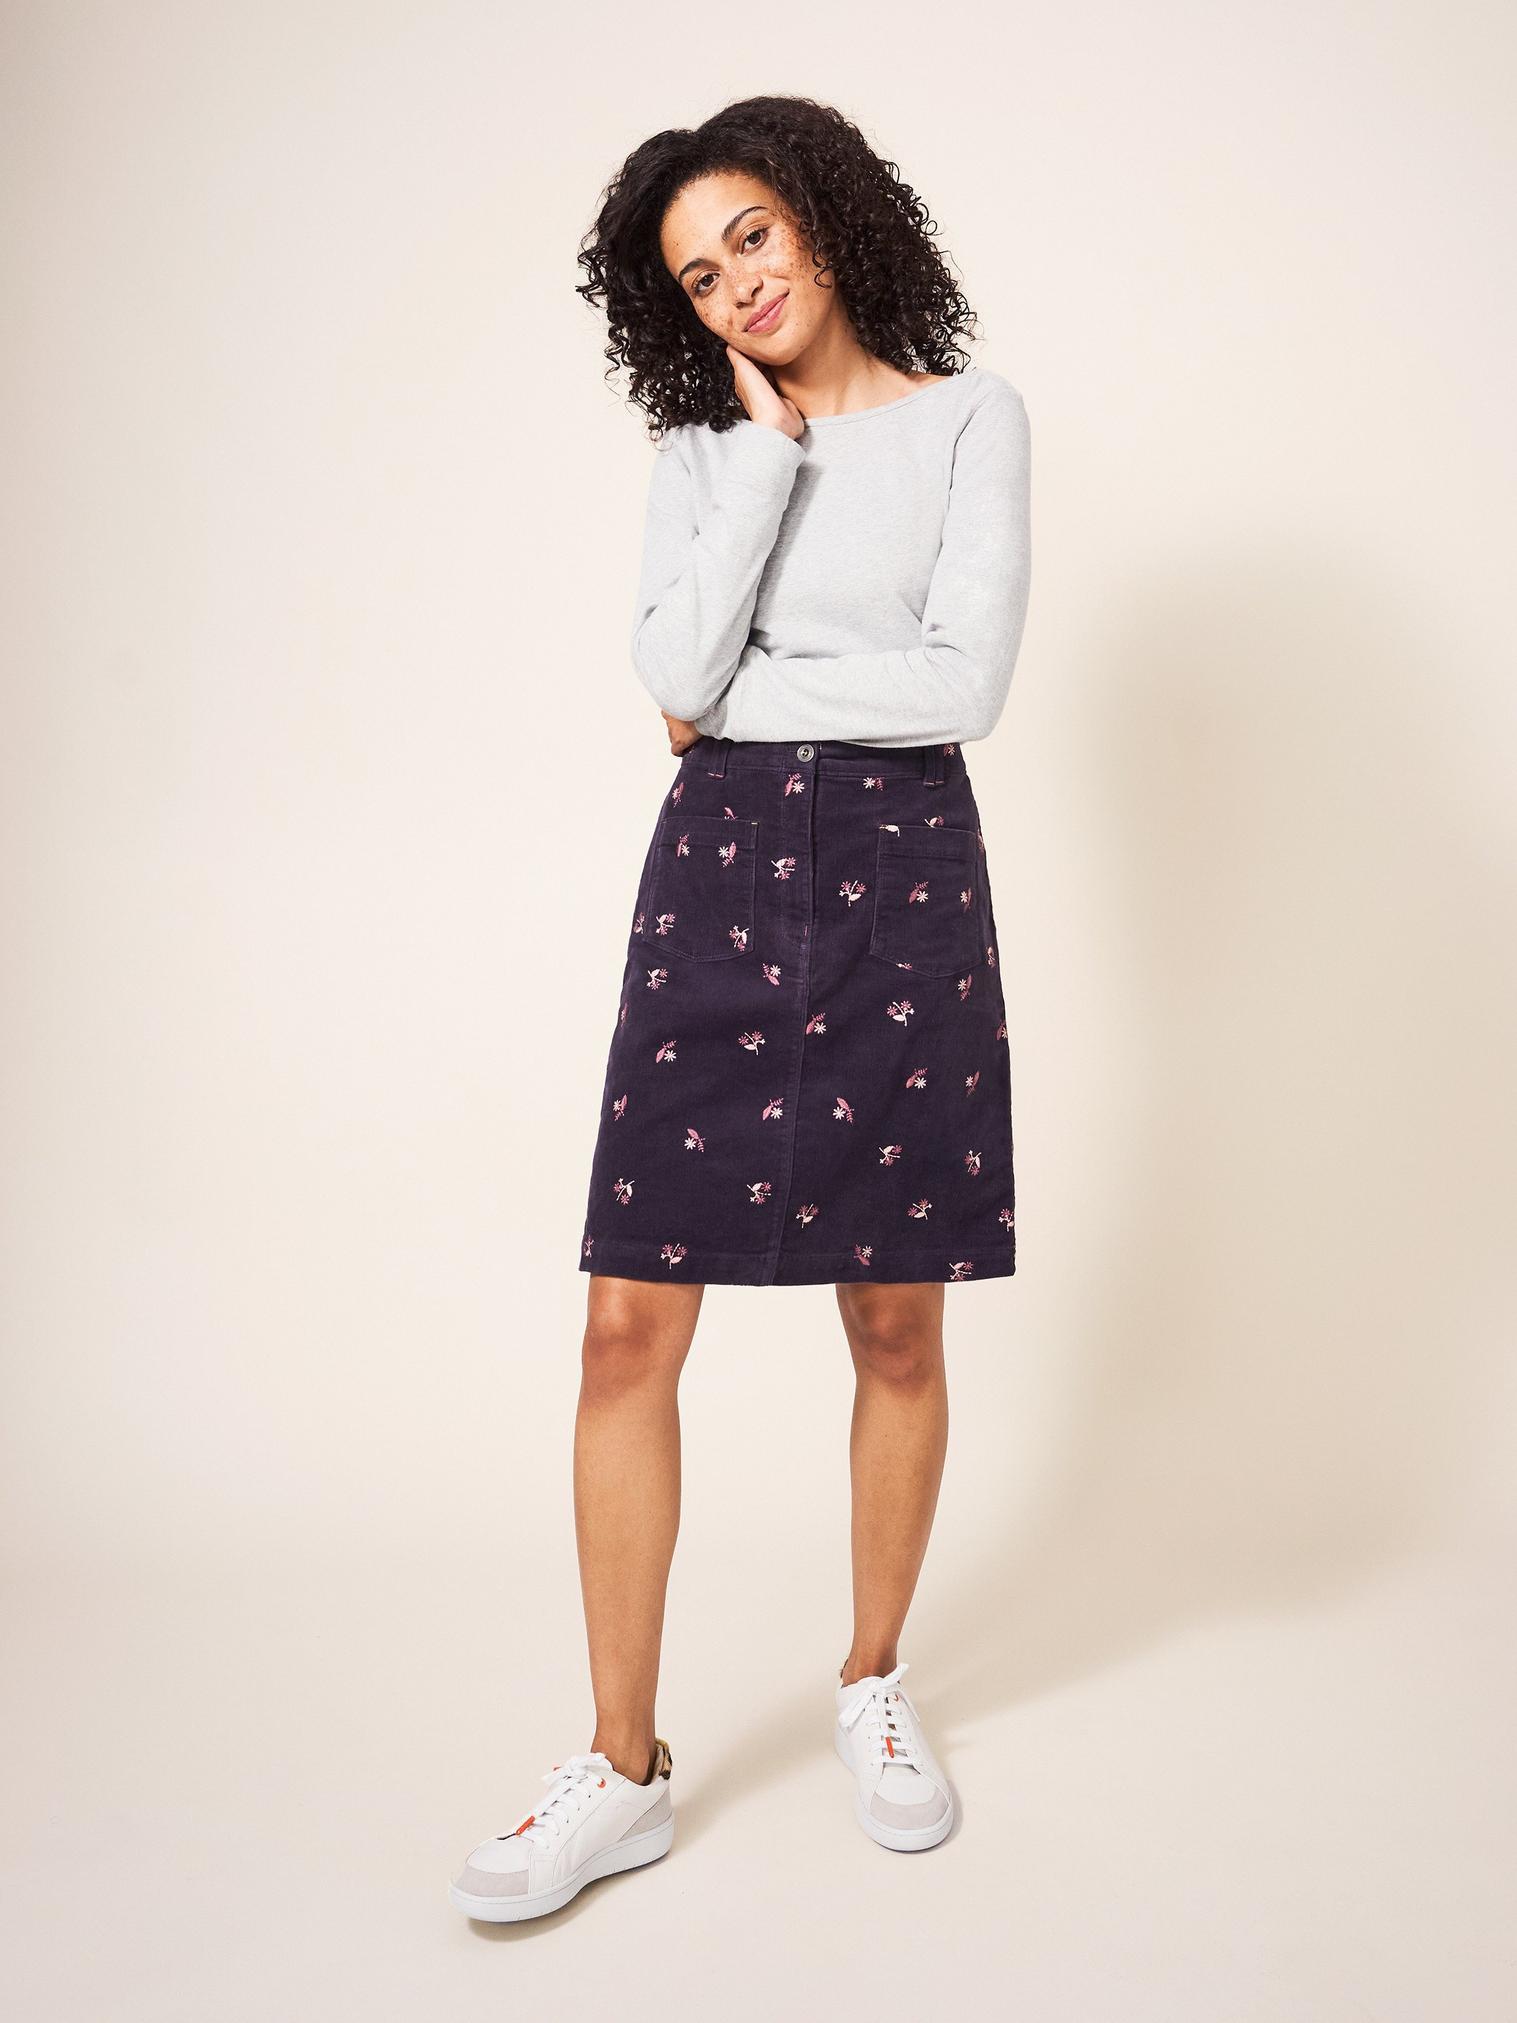 Melody Embroidered Cord Skirt in PURPLE MLT - LIFESTYLE